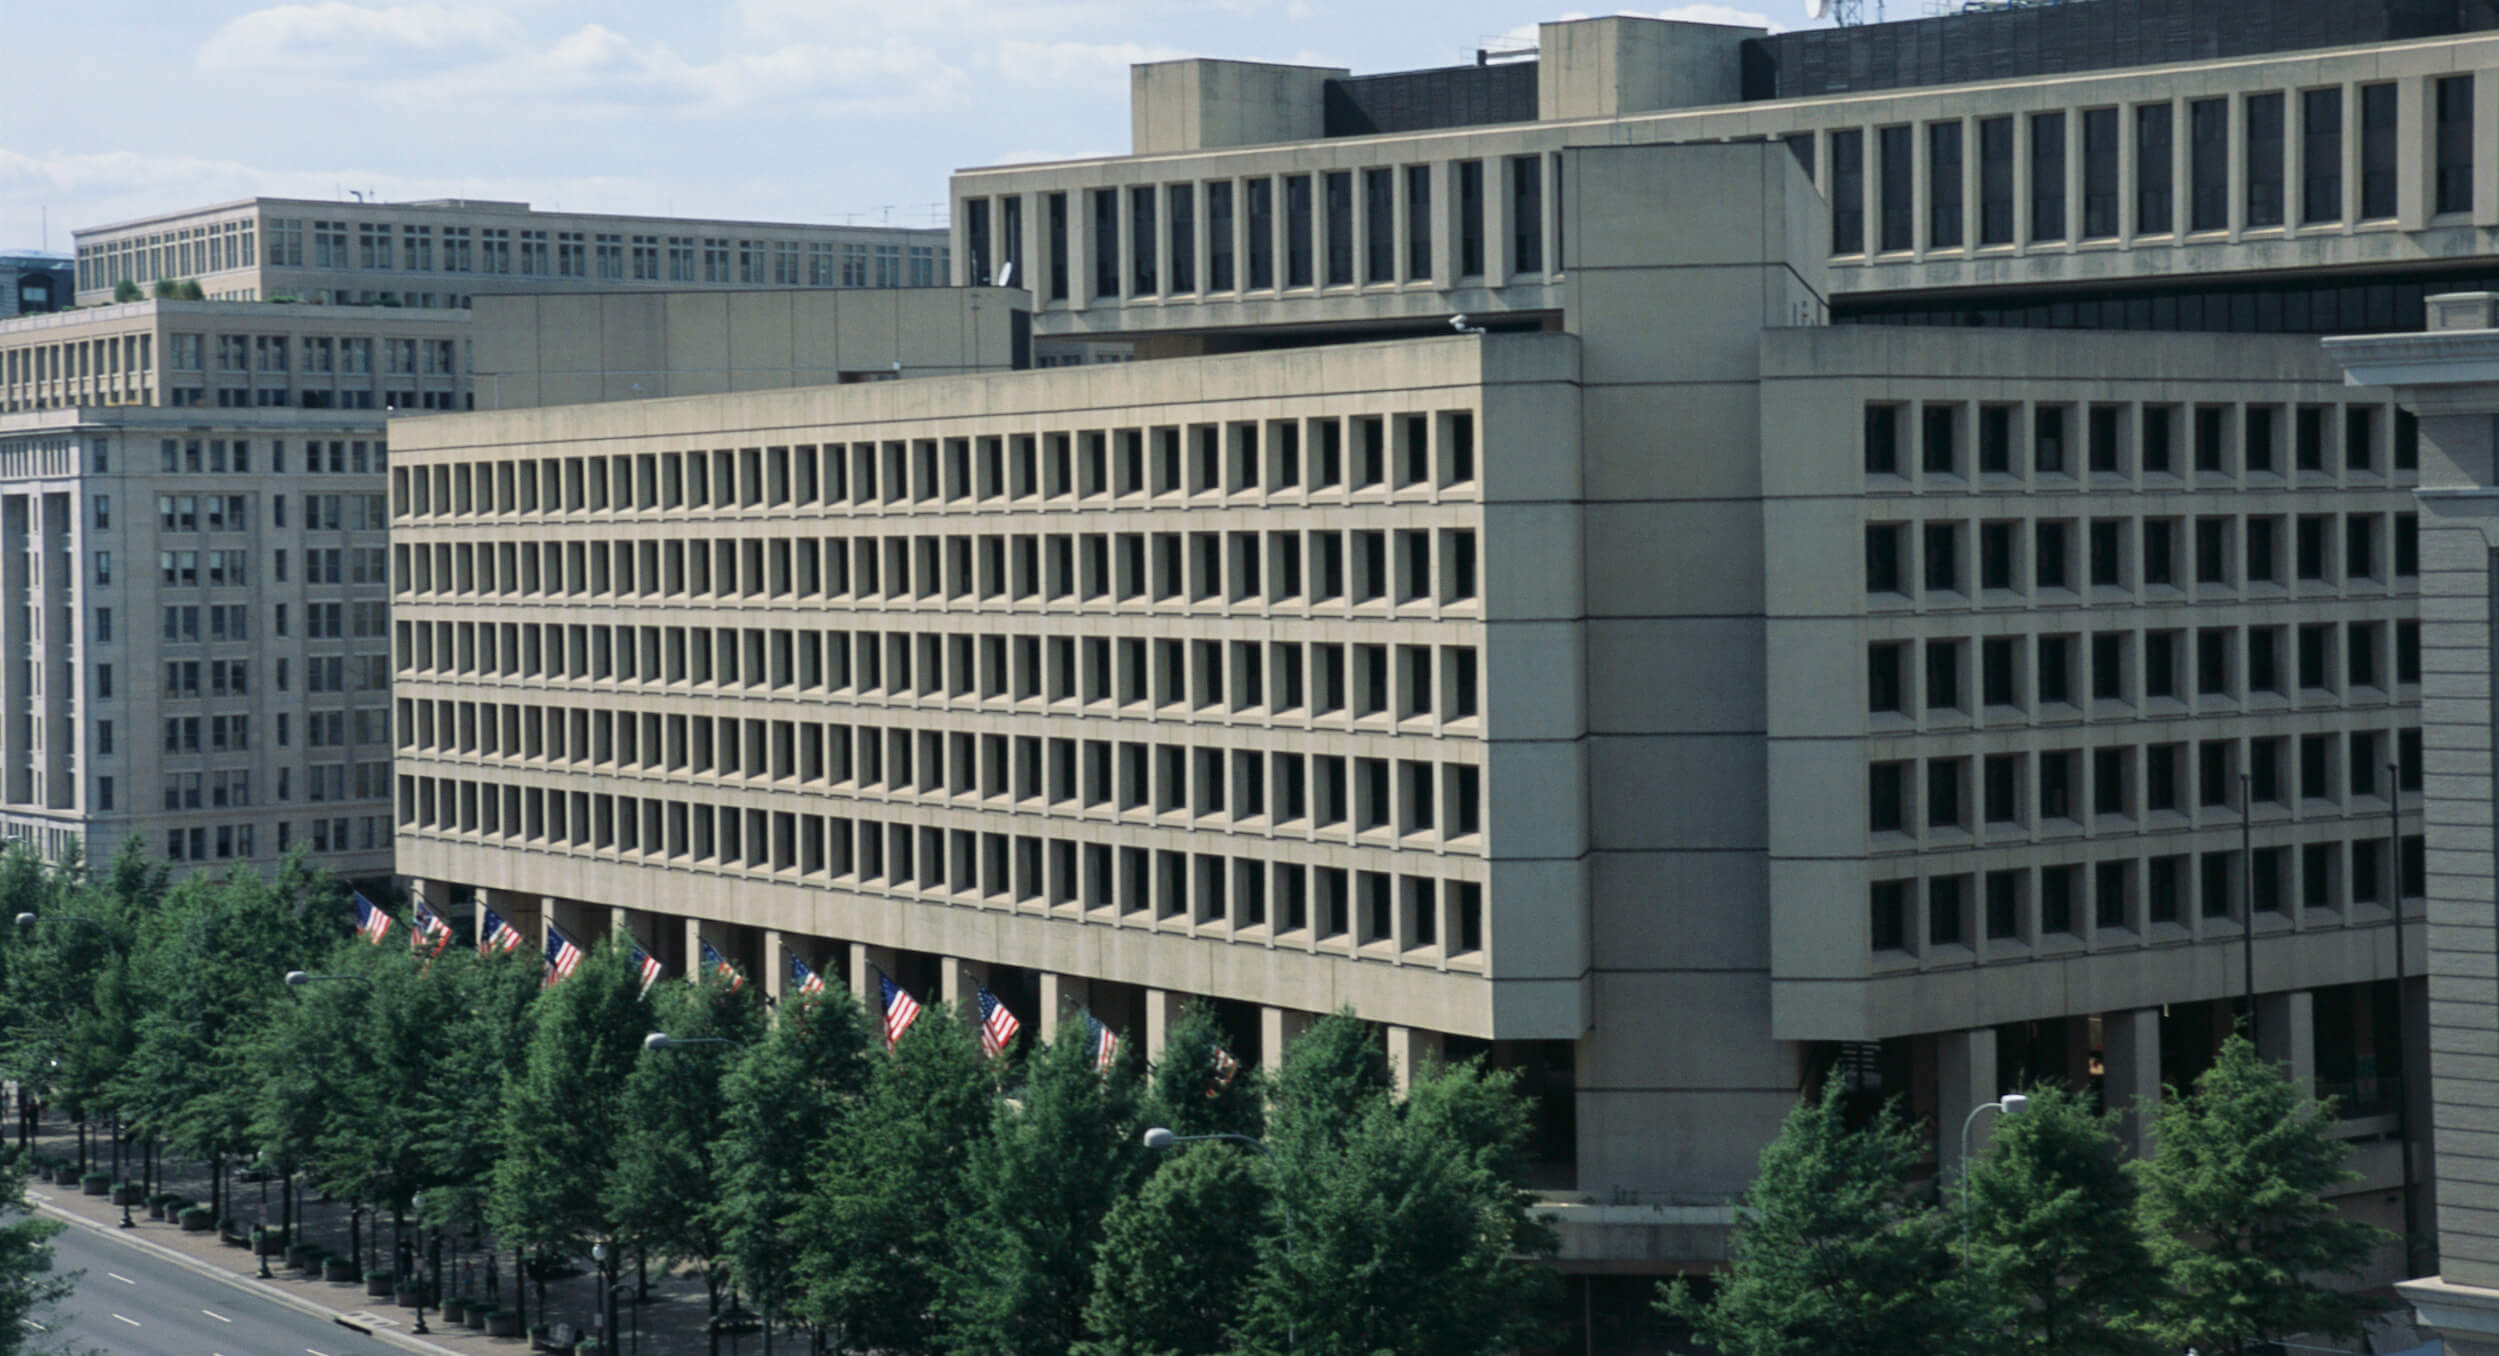 Planned New FBI HQ Is Twice the Size of the Pentagon › American Greatness